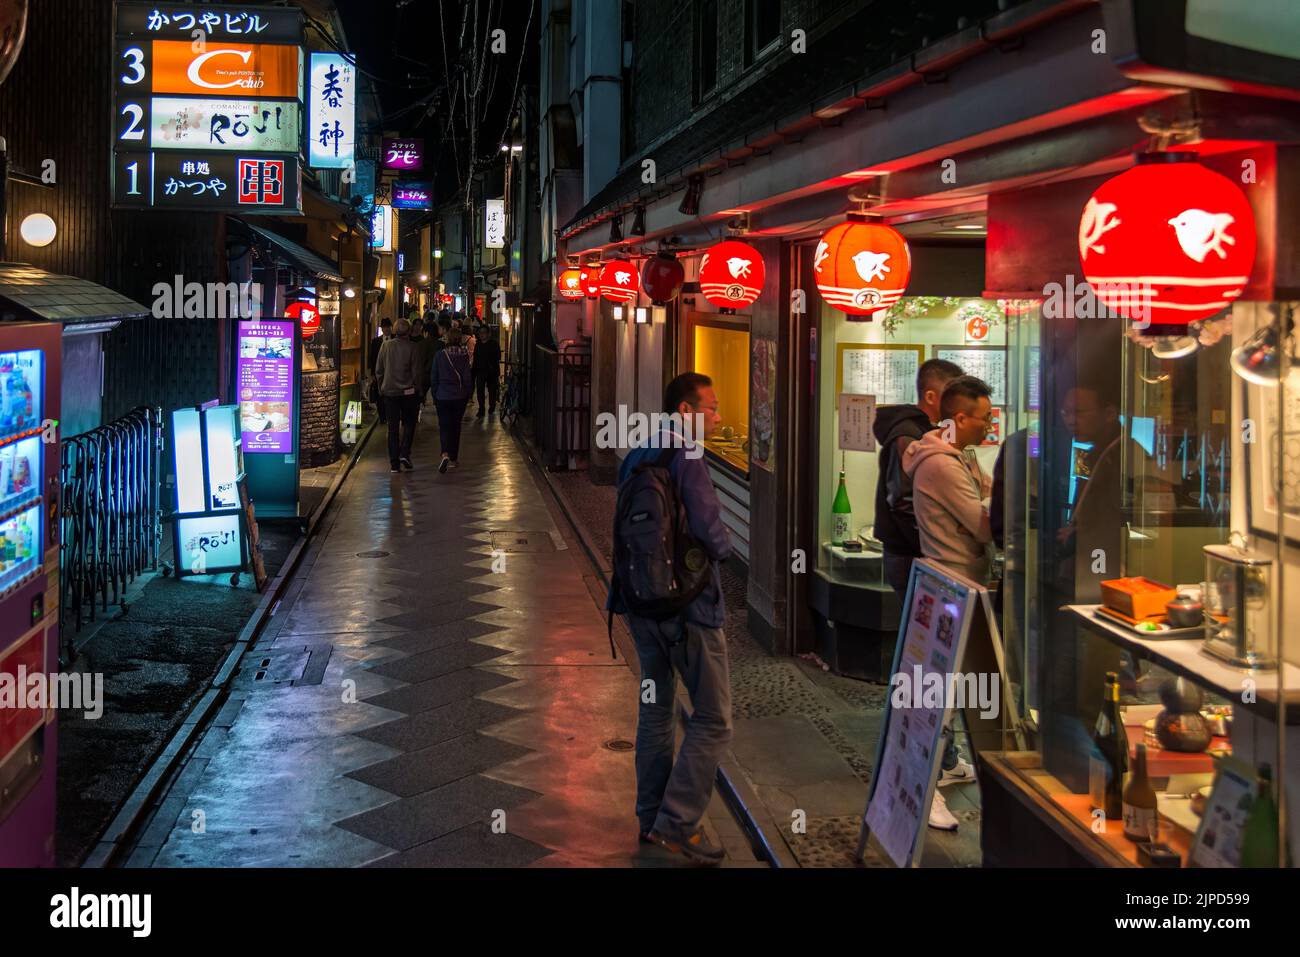 Kyoto, Japan - April 23, 2014: Night view of Pontocho Alley with illuminated restaurants and people Stock Photo